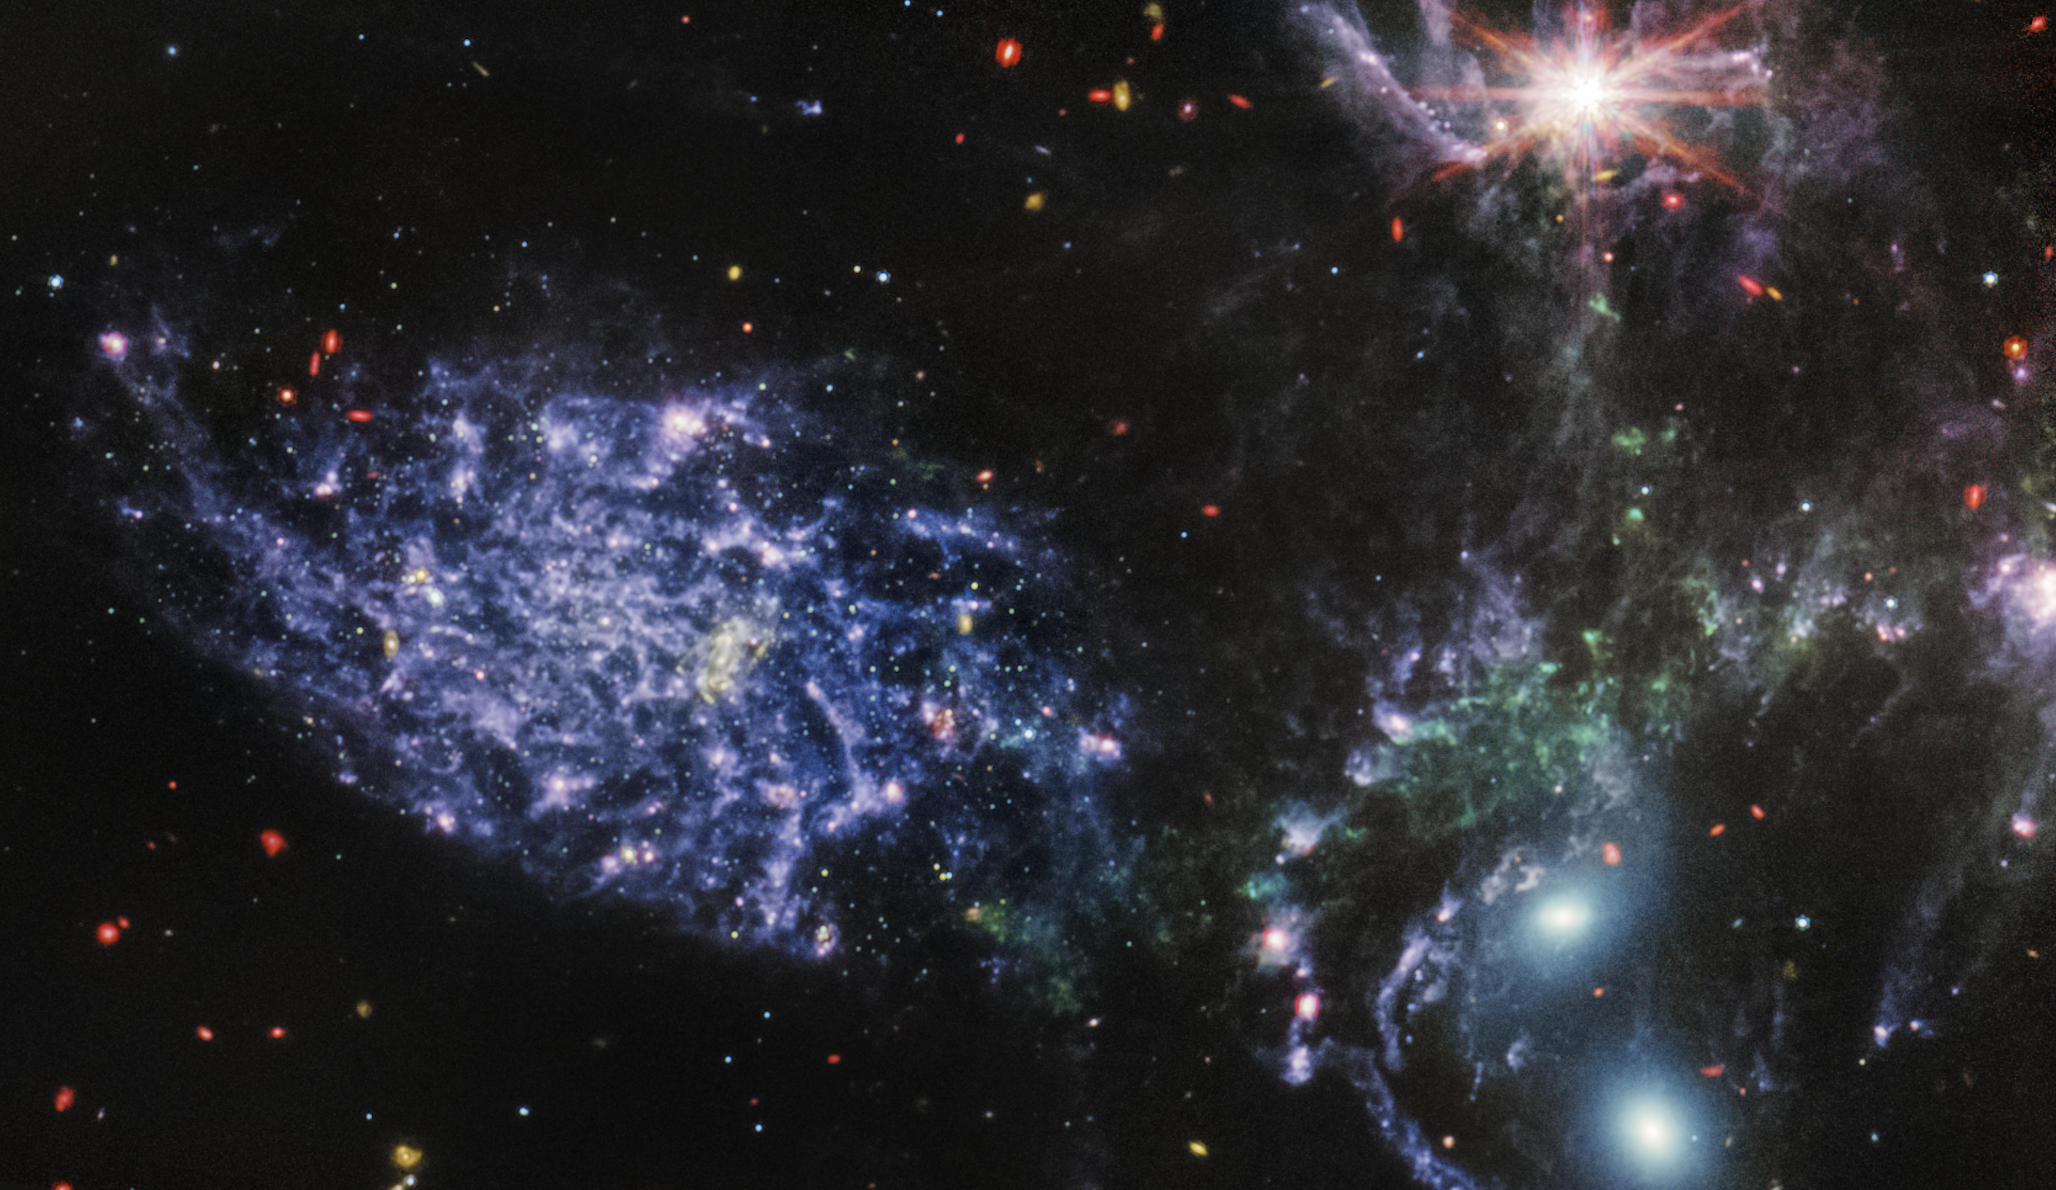 Mid-Infrared Instrument (MIRI) on JWST shows Stephan's Quintet in never-before-seen detail thanks to its powerful, mid-infrared vision. Credit: NASA, ESA, CSA, STScI.